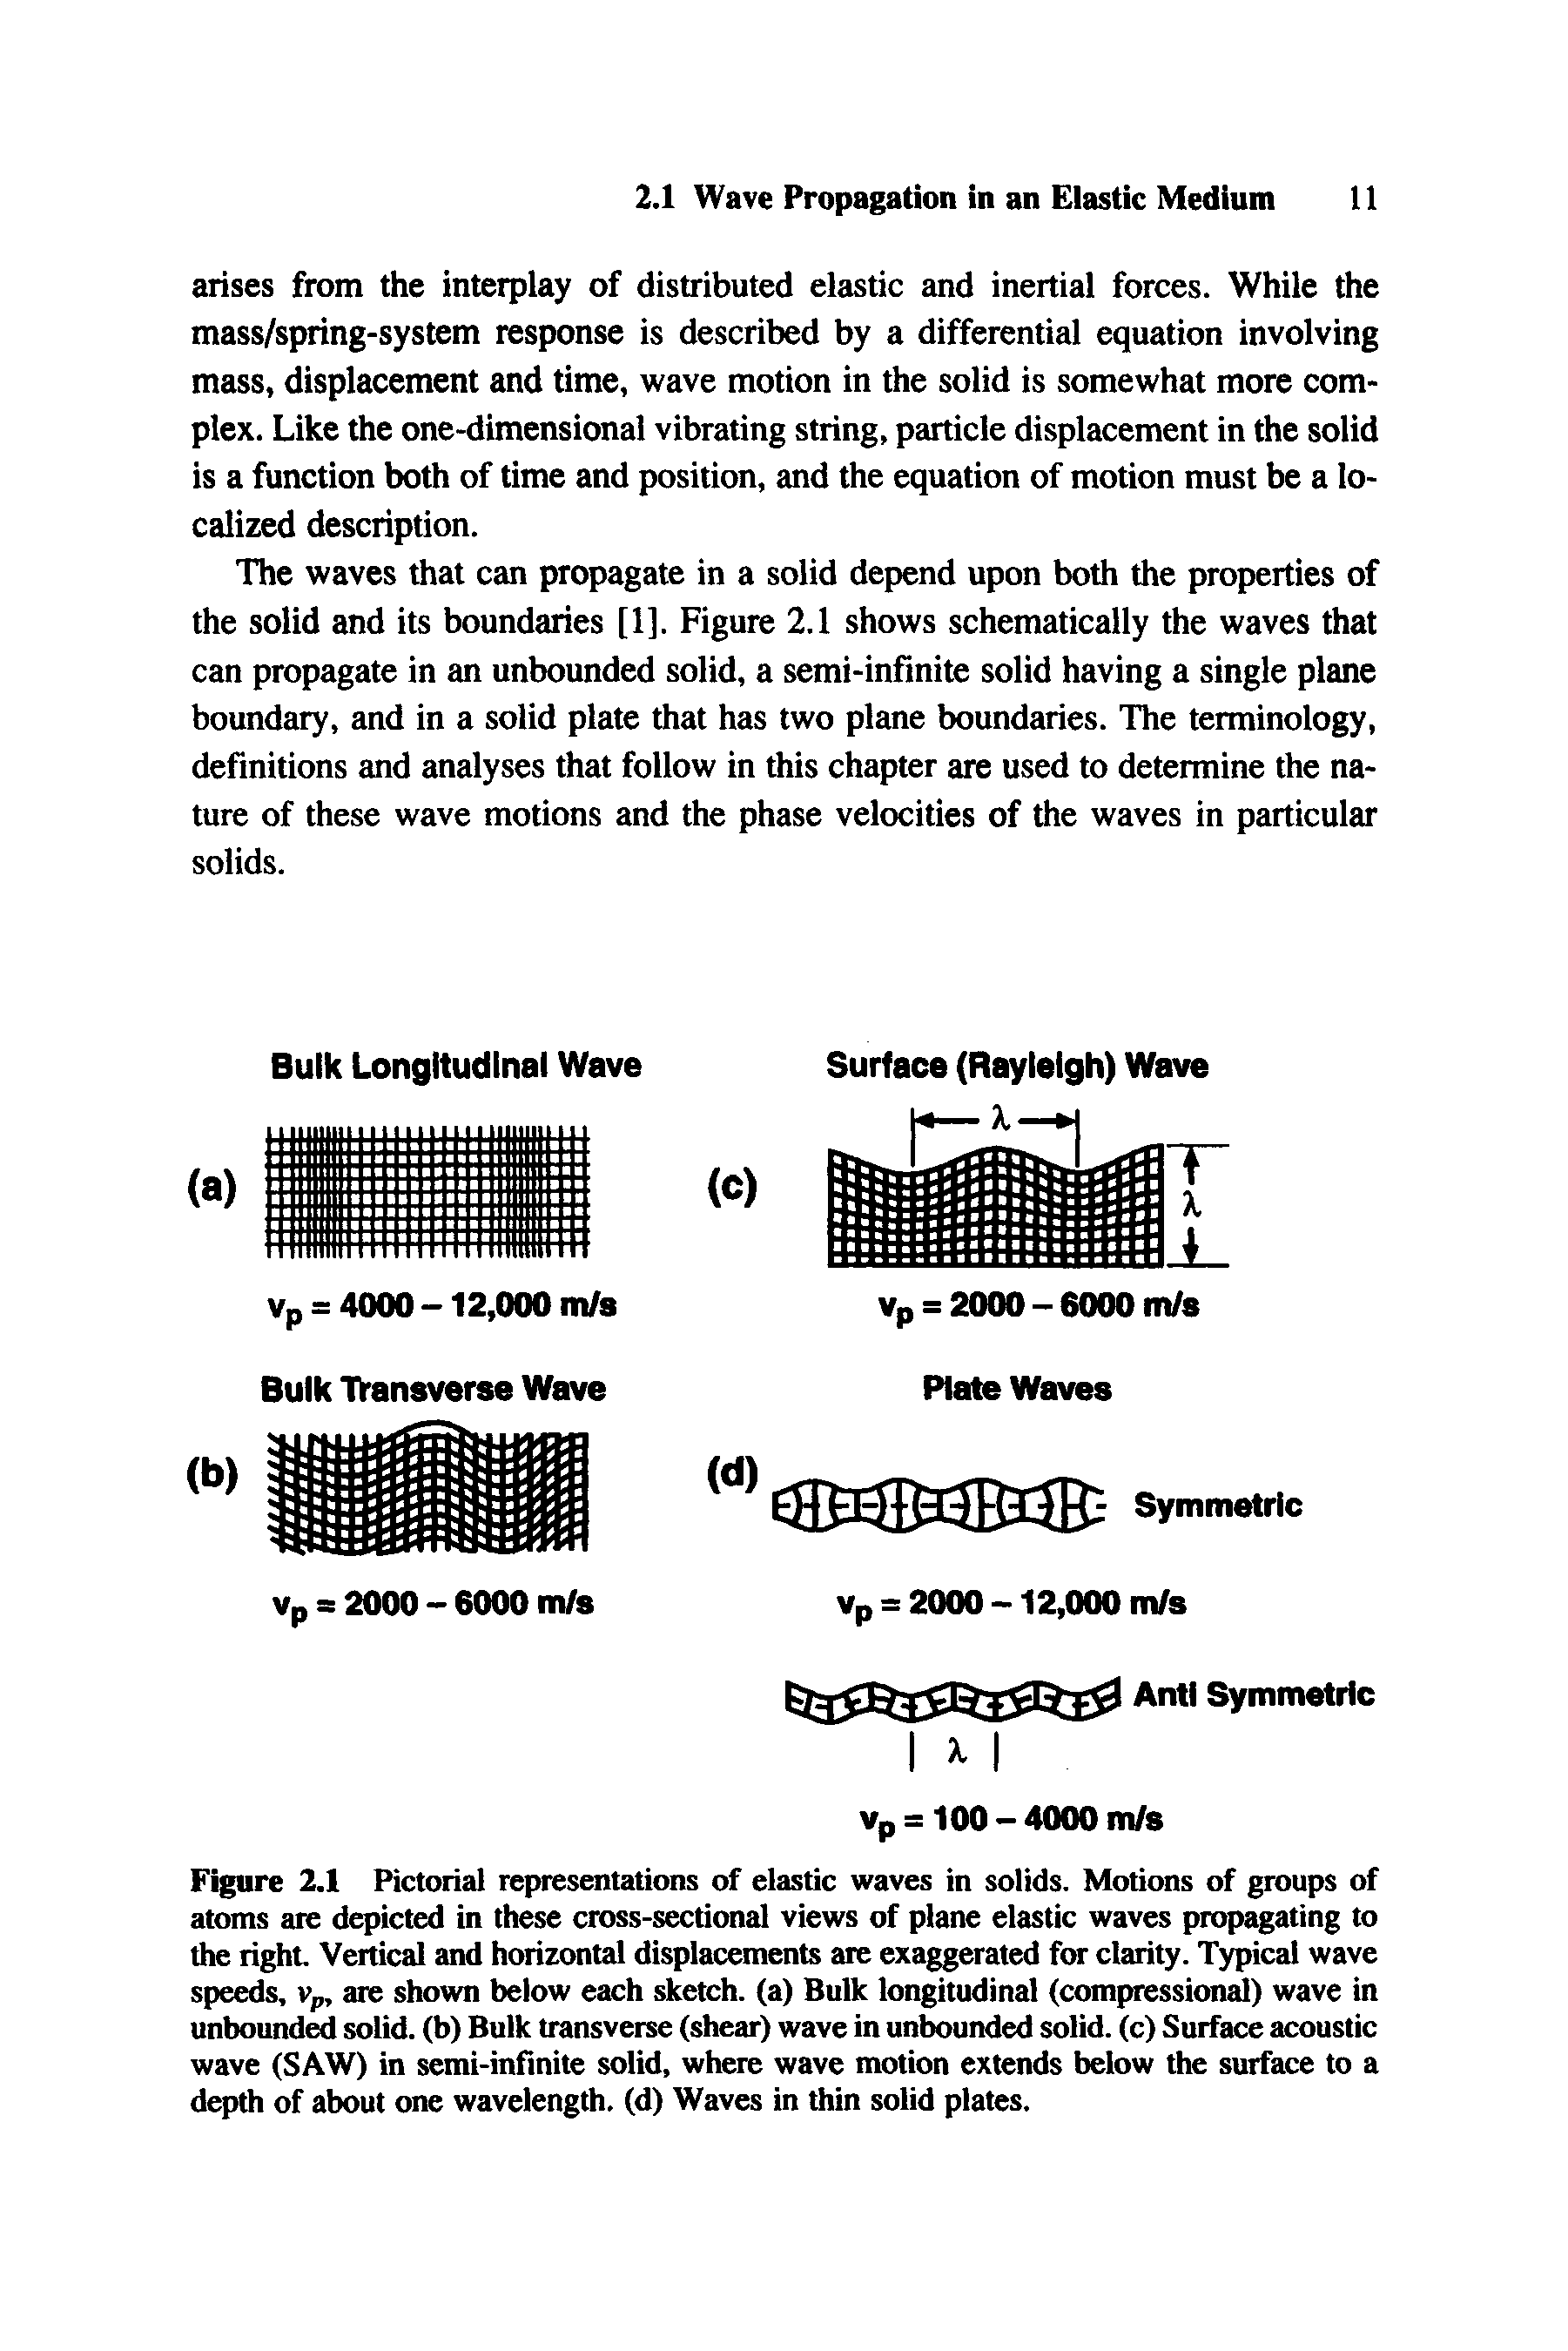 Figure 2.1 Pictorial representations of elastic waves in solids. Motions of groups of atoms ate depicted in these cross-sectional views of plane elastic waves propagating to the right. Vertical and horizontal displacements are exaggerated for clarity. Typical wave speeds, Vp, are shown below each sketch, (a) Bulk longitudinal (compressional) wave in unbounded solid, (b) Bulk transverse (shear) wave in unbounded solid, (c) Surface acoustic wave (SAW) in semi-infinite solid, where wave motion extends below the surface to a depth of about one wavelength, (d) Waves in thin solid plates.